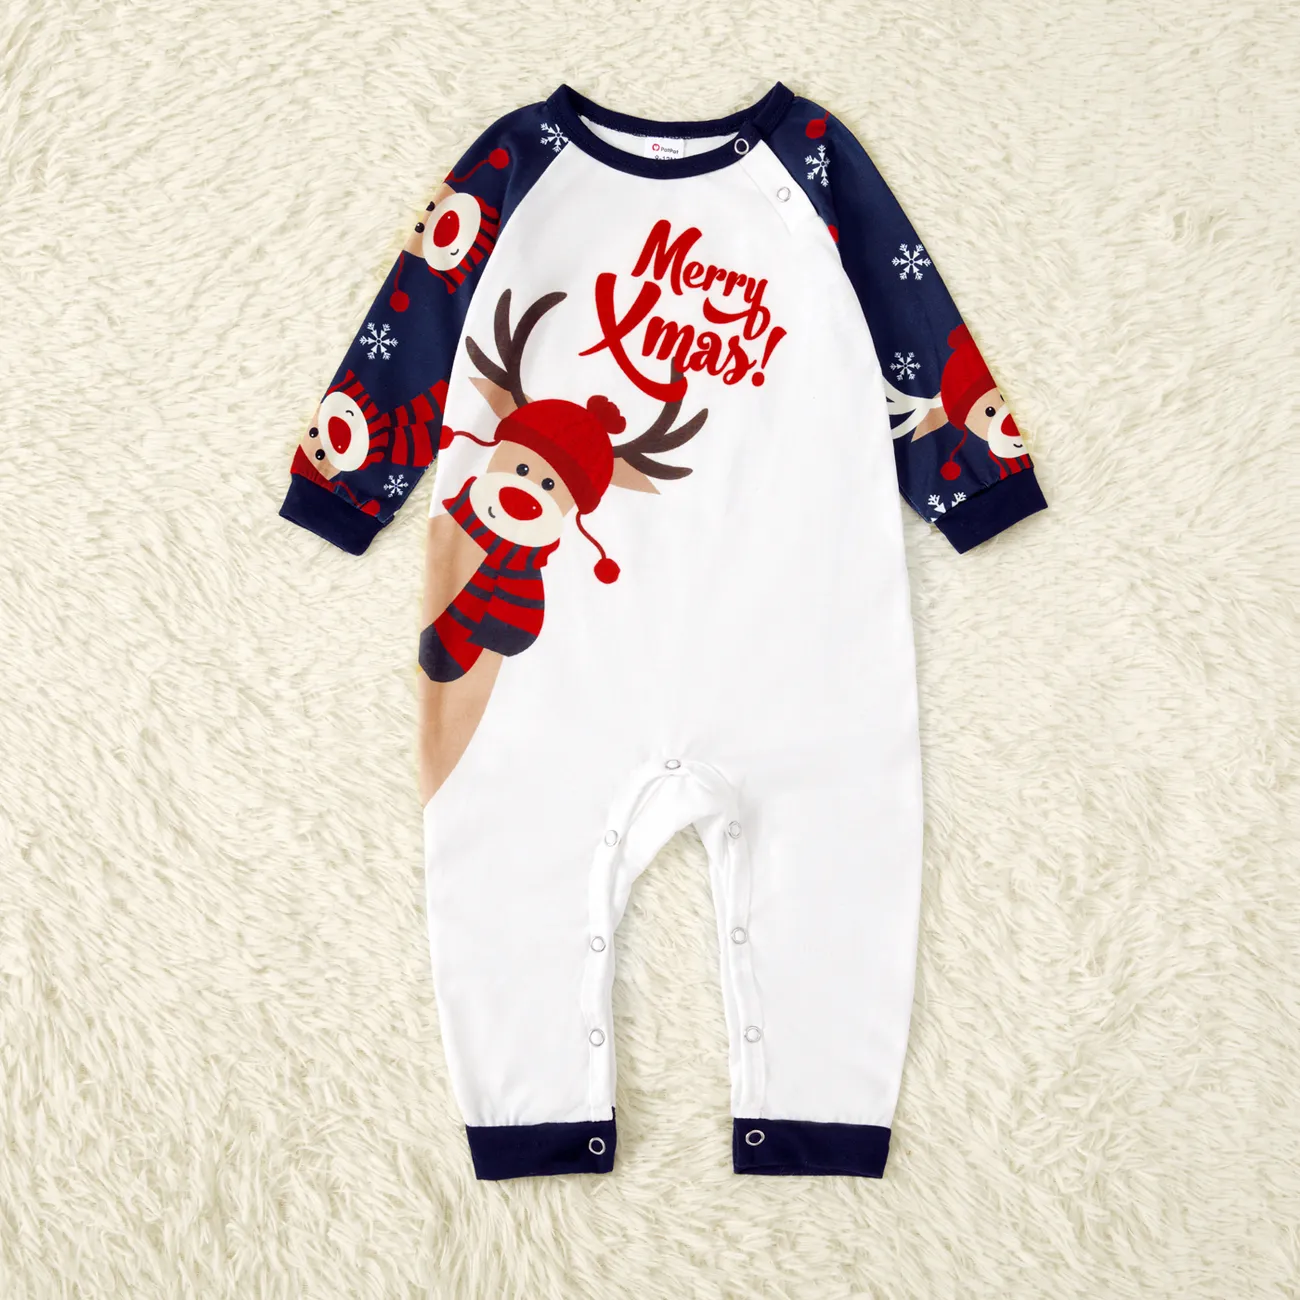 Merry Xmas Letters and Reindeer Print Navy Family Matching Long-sleeve Pajamas Sets (Flame Resistant)  big image 1